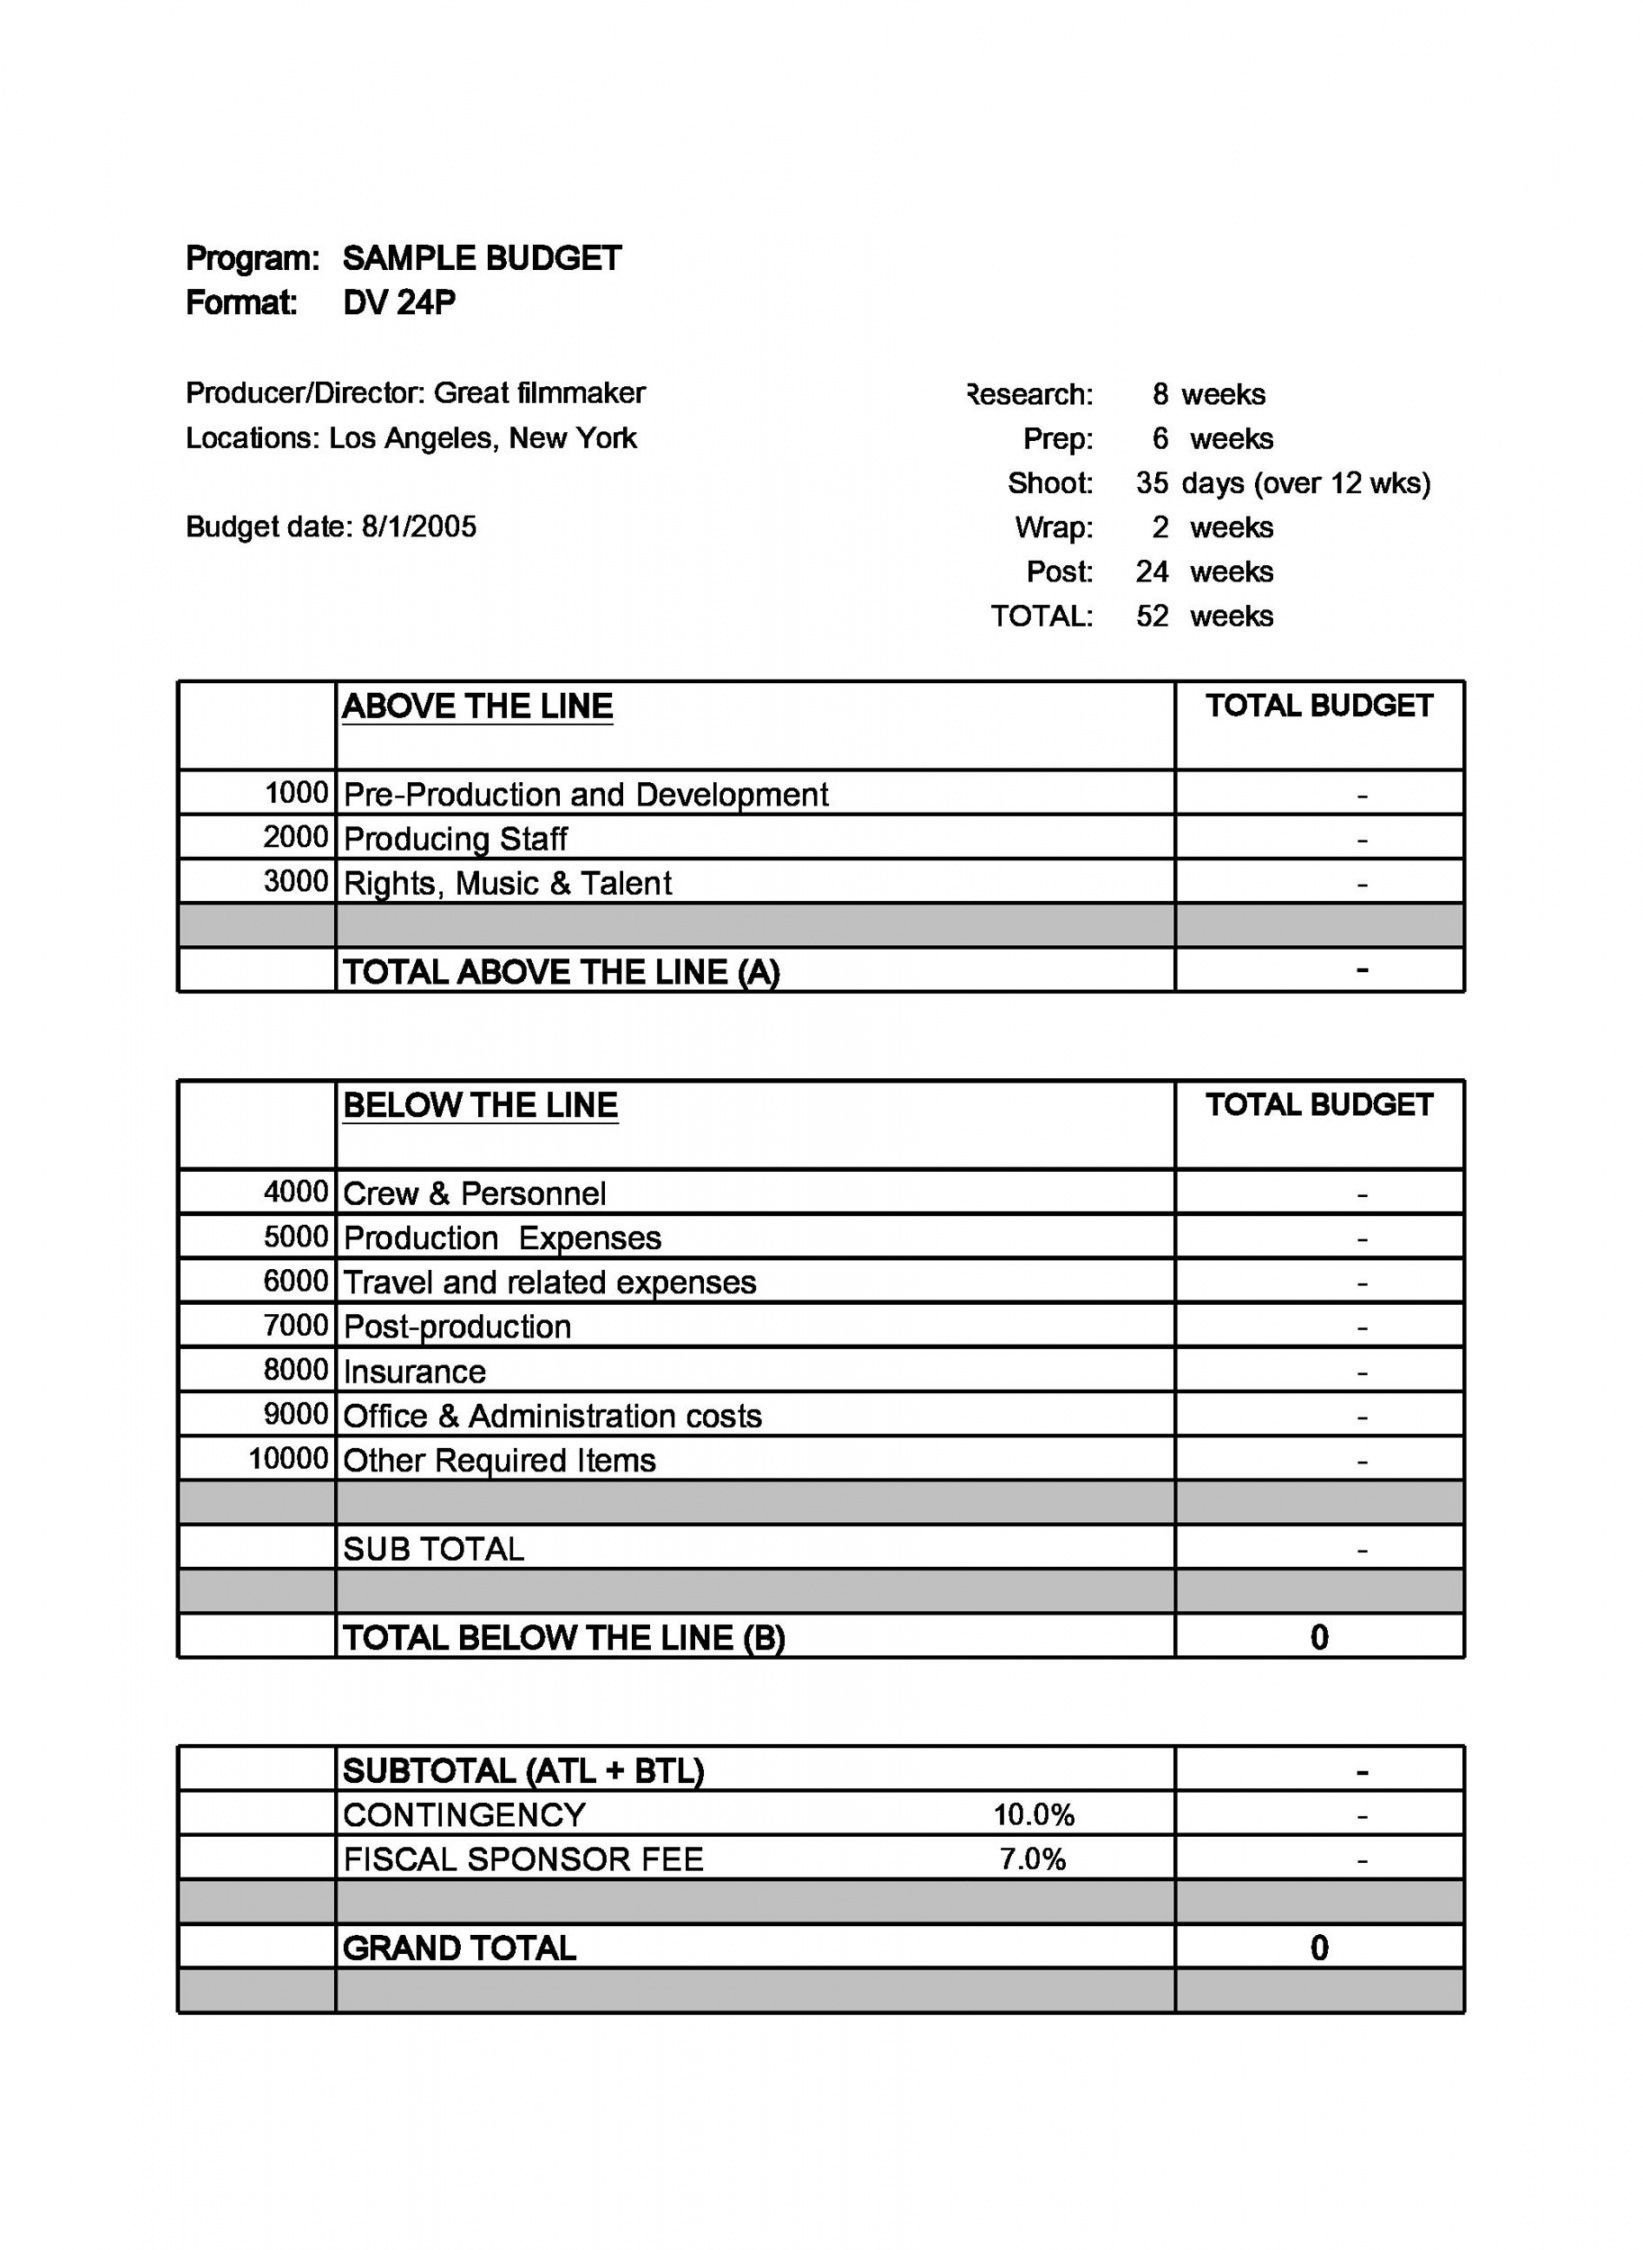 Film Art Department Budget Template Intended For Documentary Film Budget Template Intended For Documentary Film Budget Template